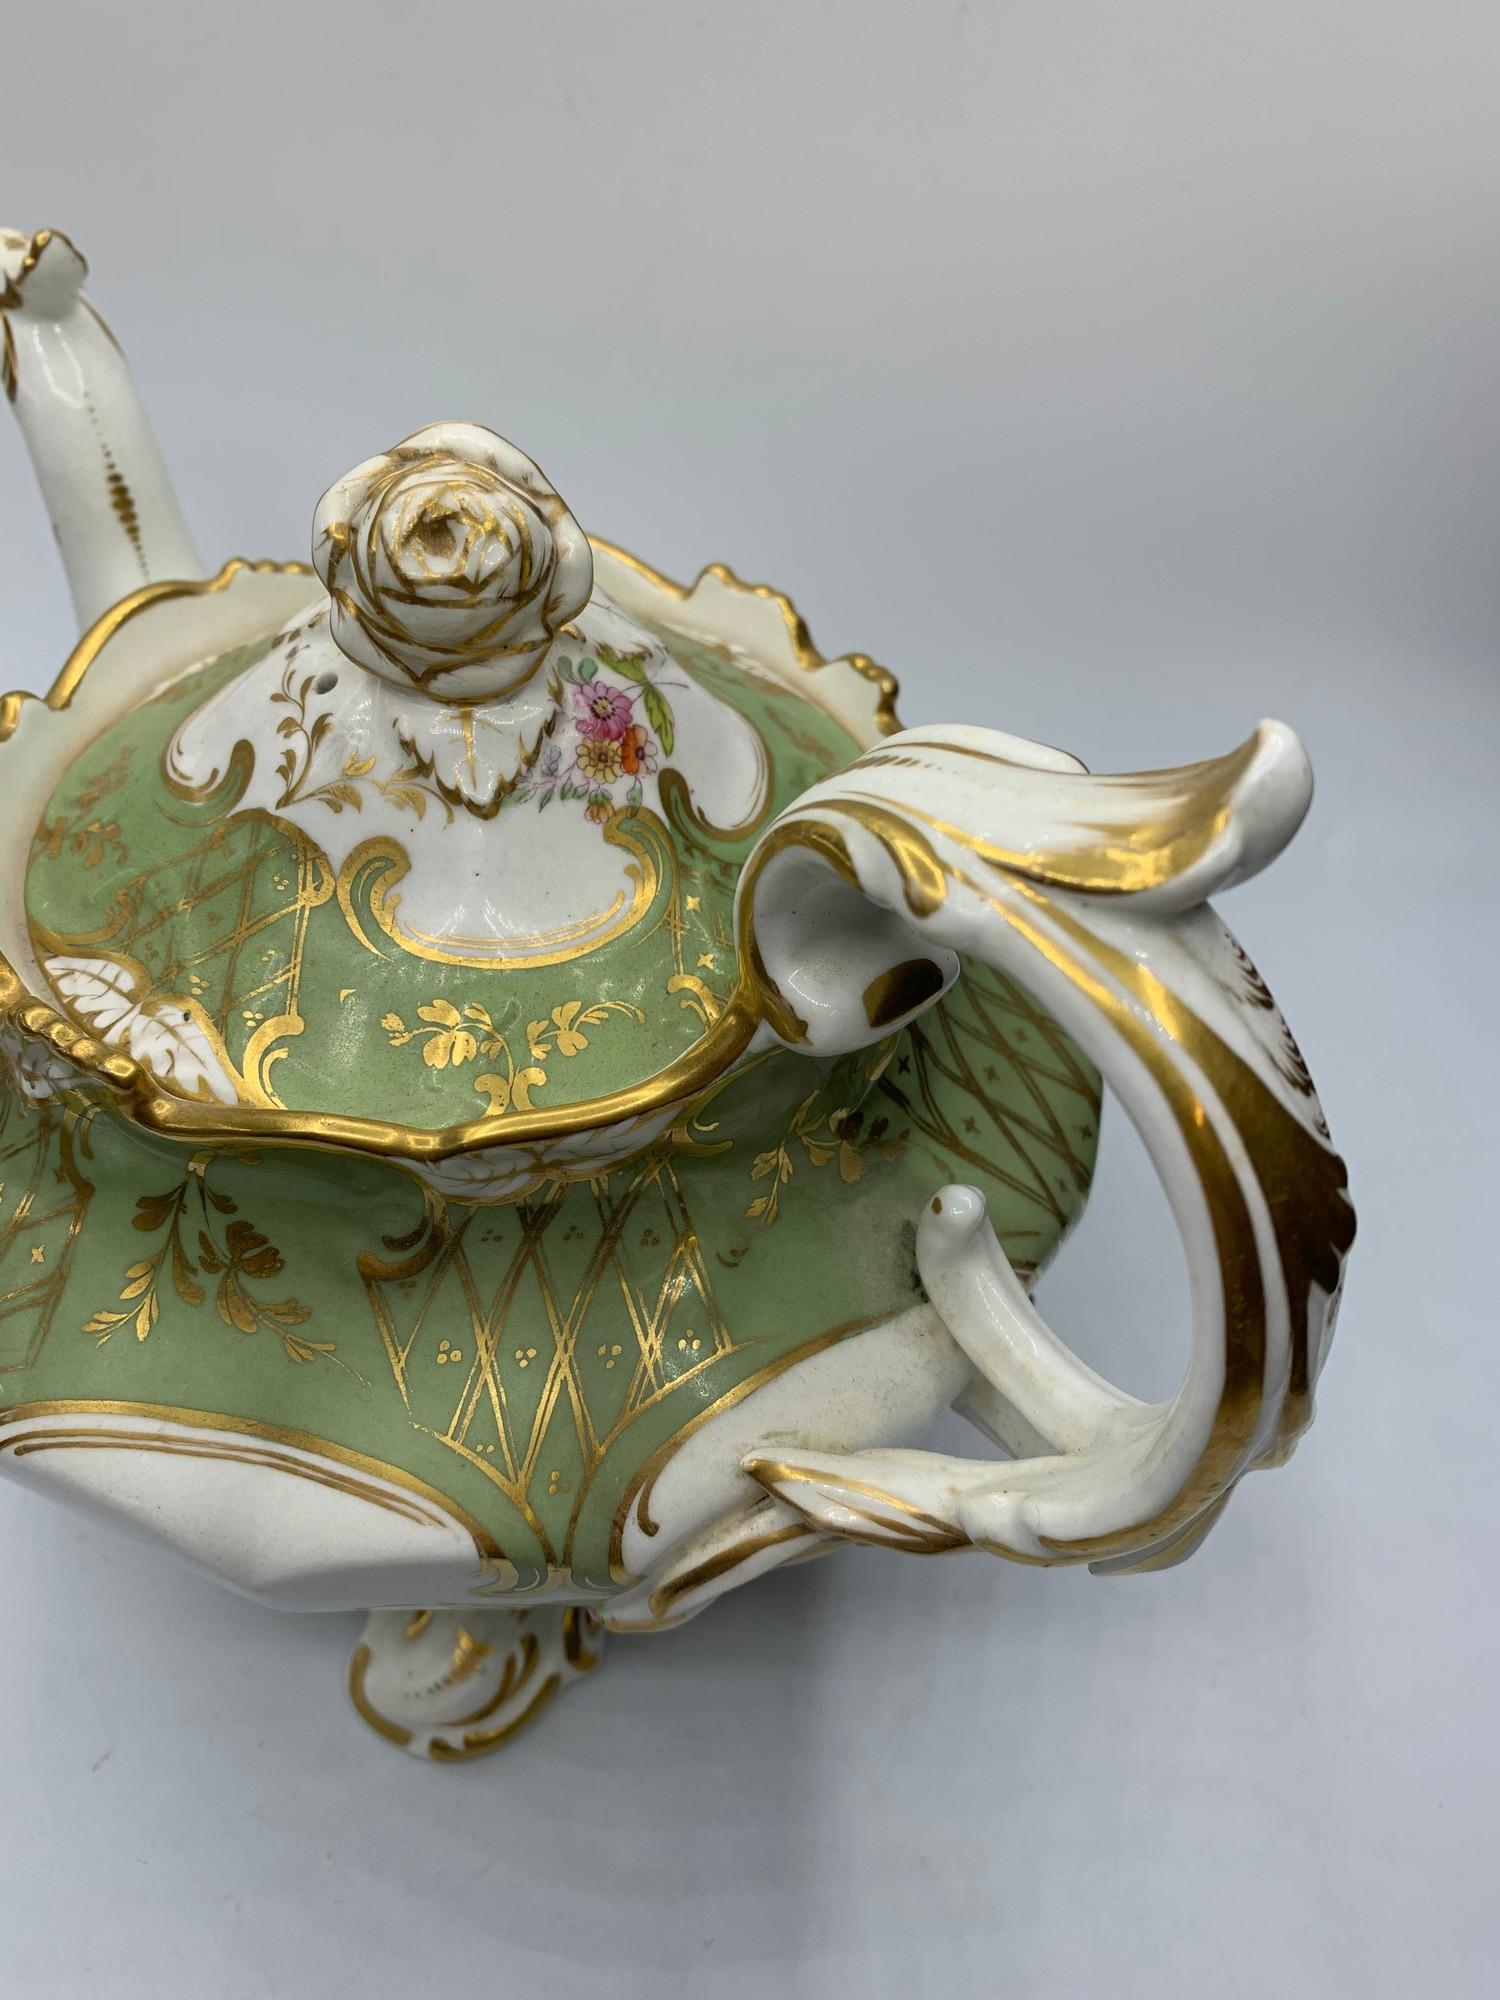 H&R Daniel second bell shape Teapot in good Rococo style with slanted rose on lid in good condition - Image 4 of 6